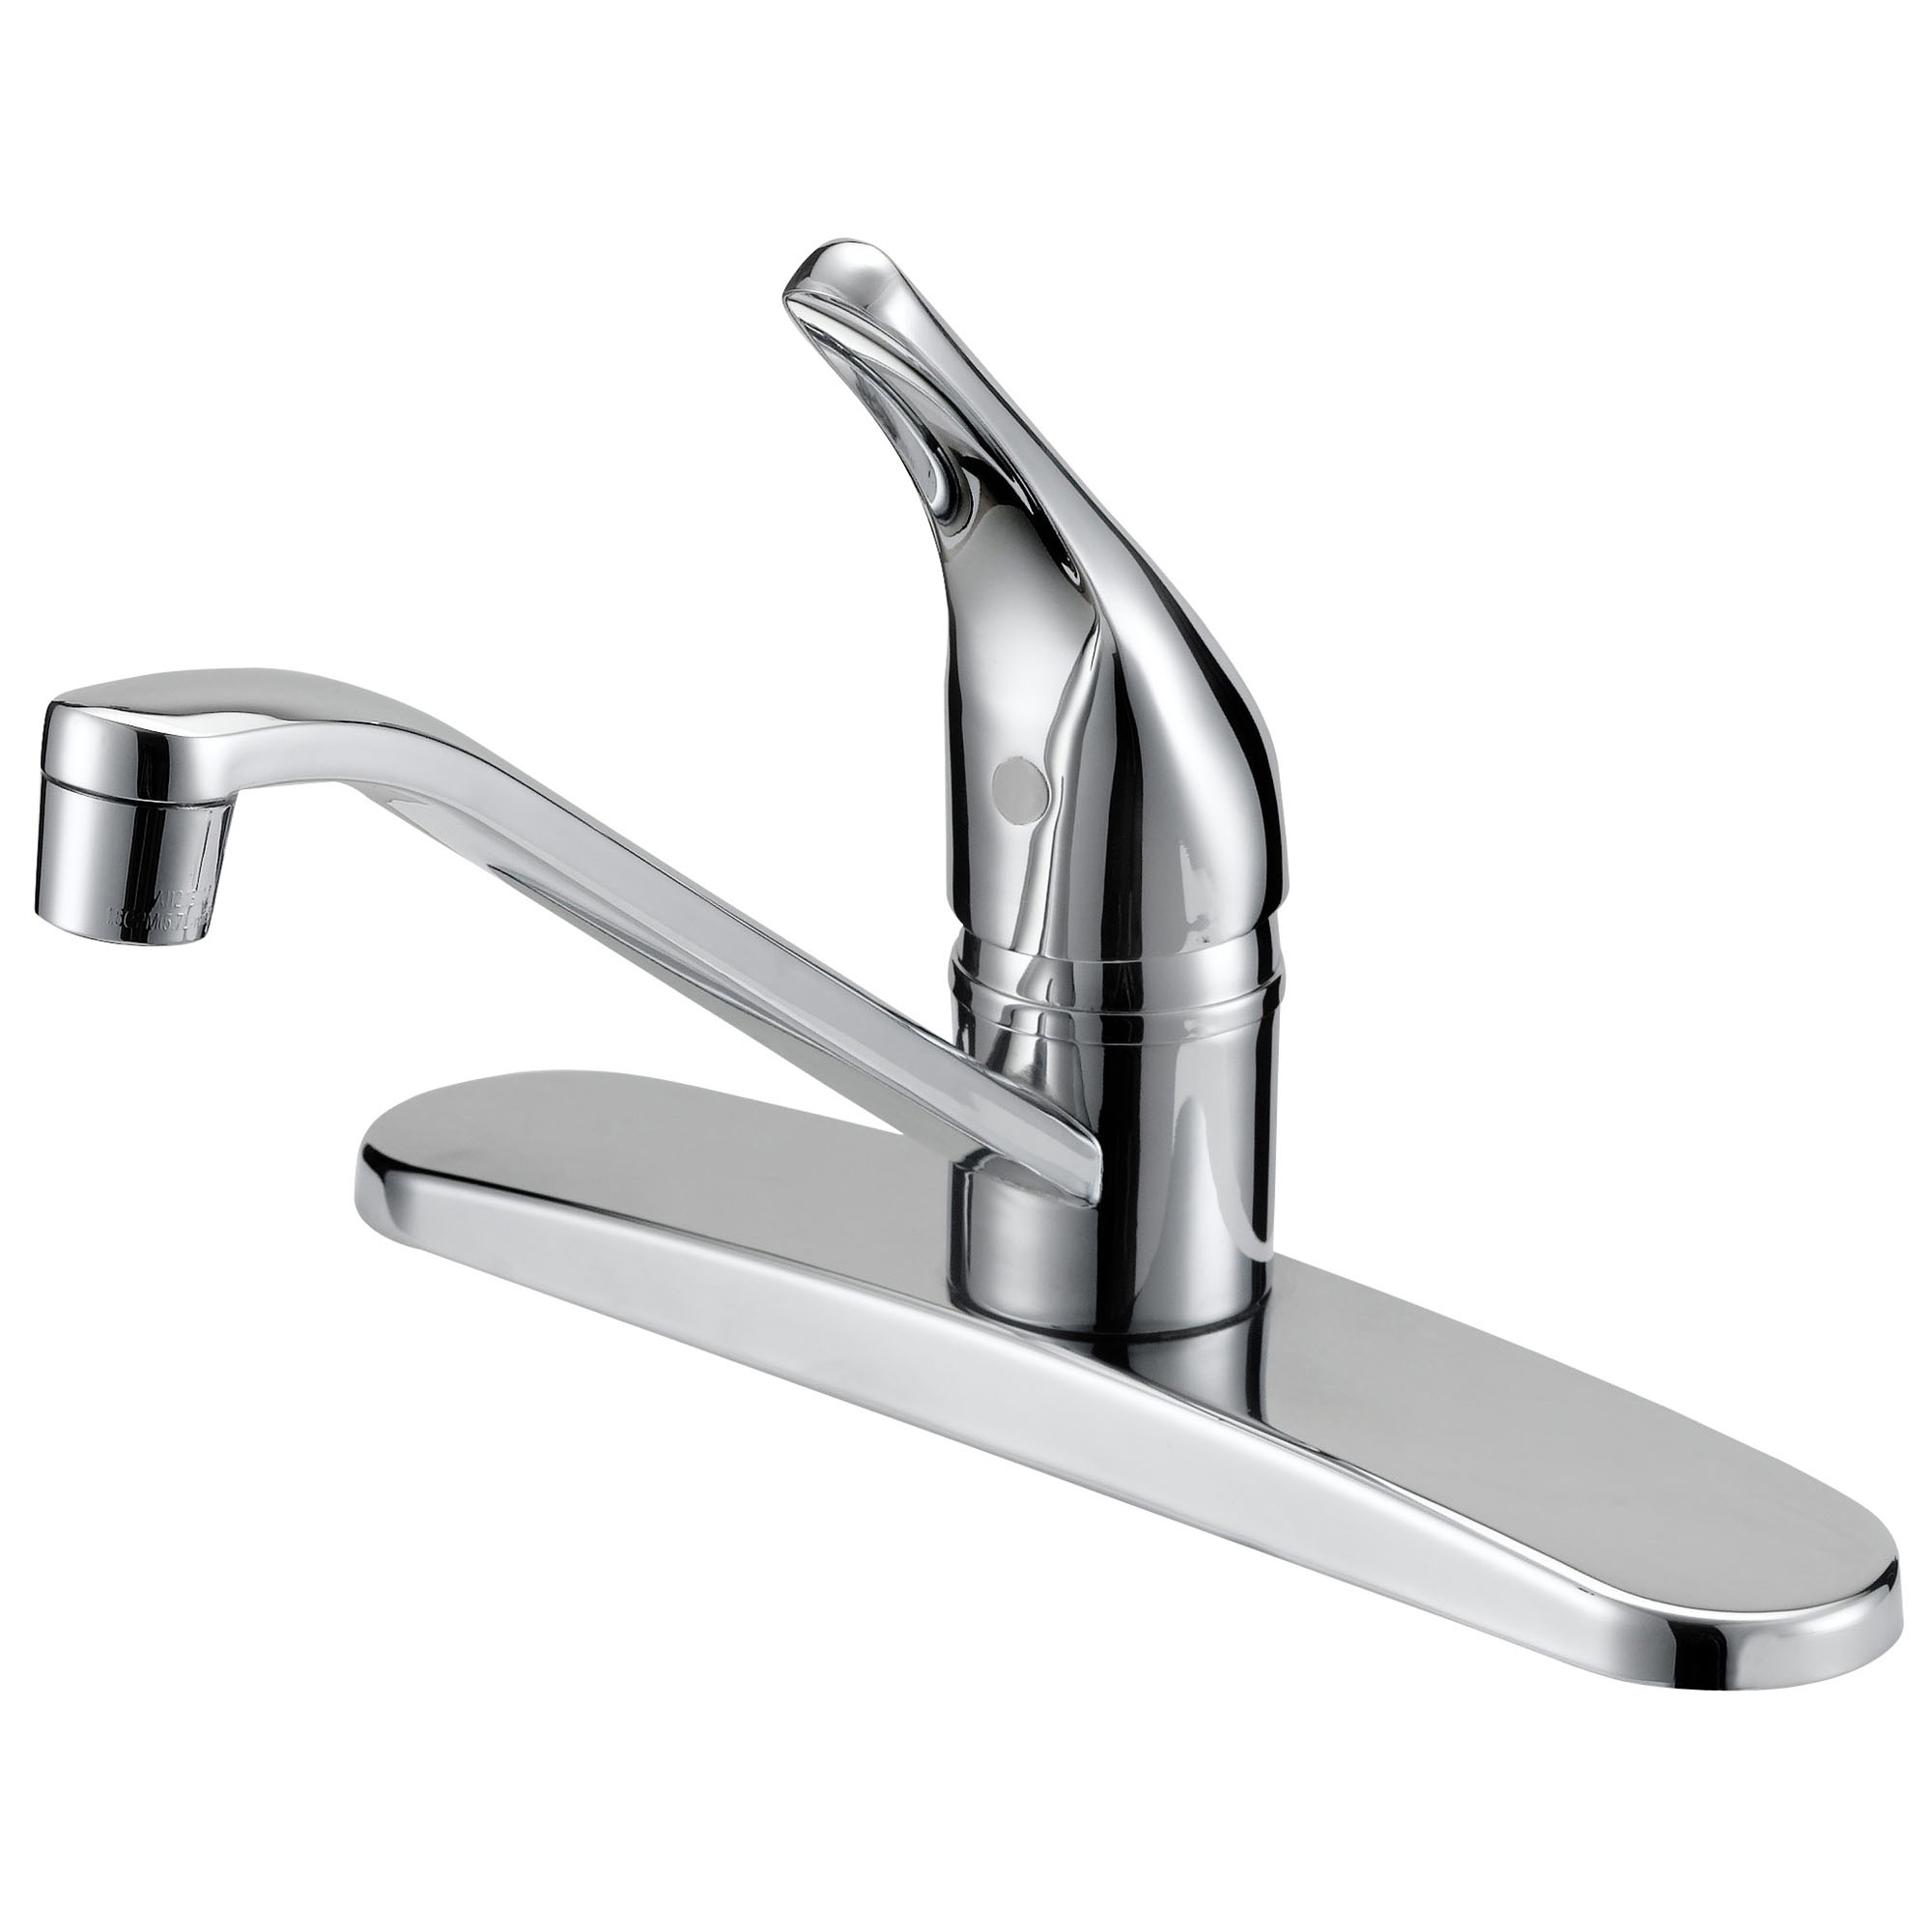 Boston Harbor FS610048CP Kitchen Faucet, 1.8 gpm, 4-Faucet Hole, Metal/Plastic, Chrome Plated, Deck Mounting